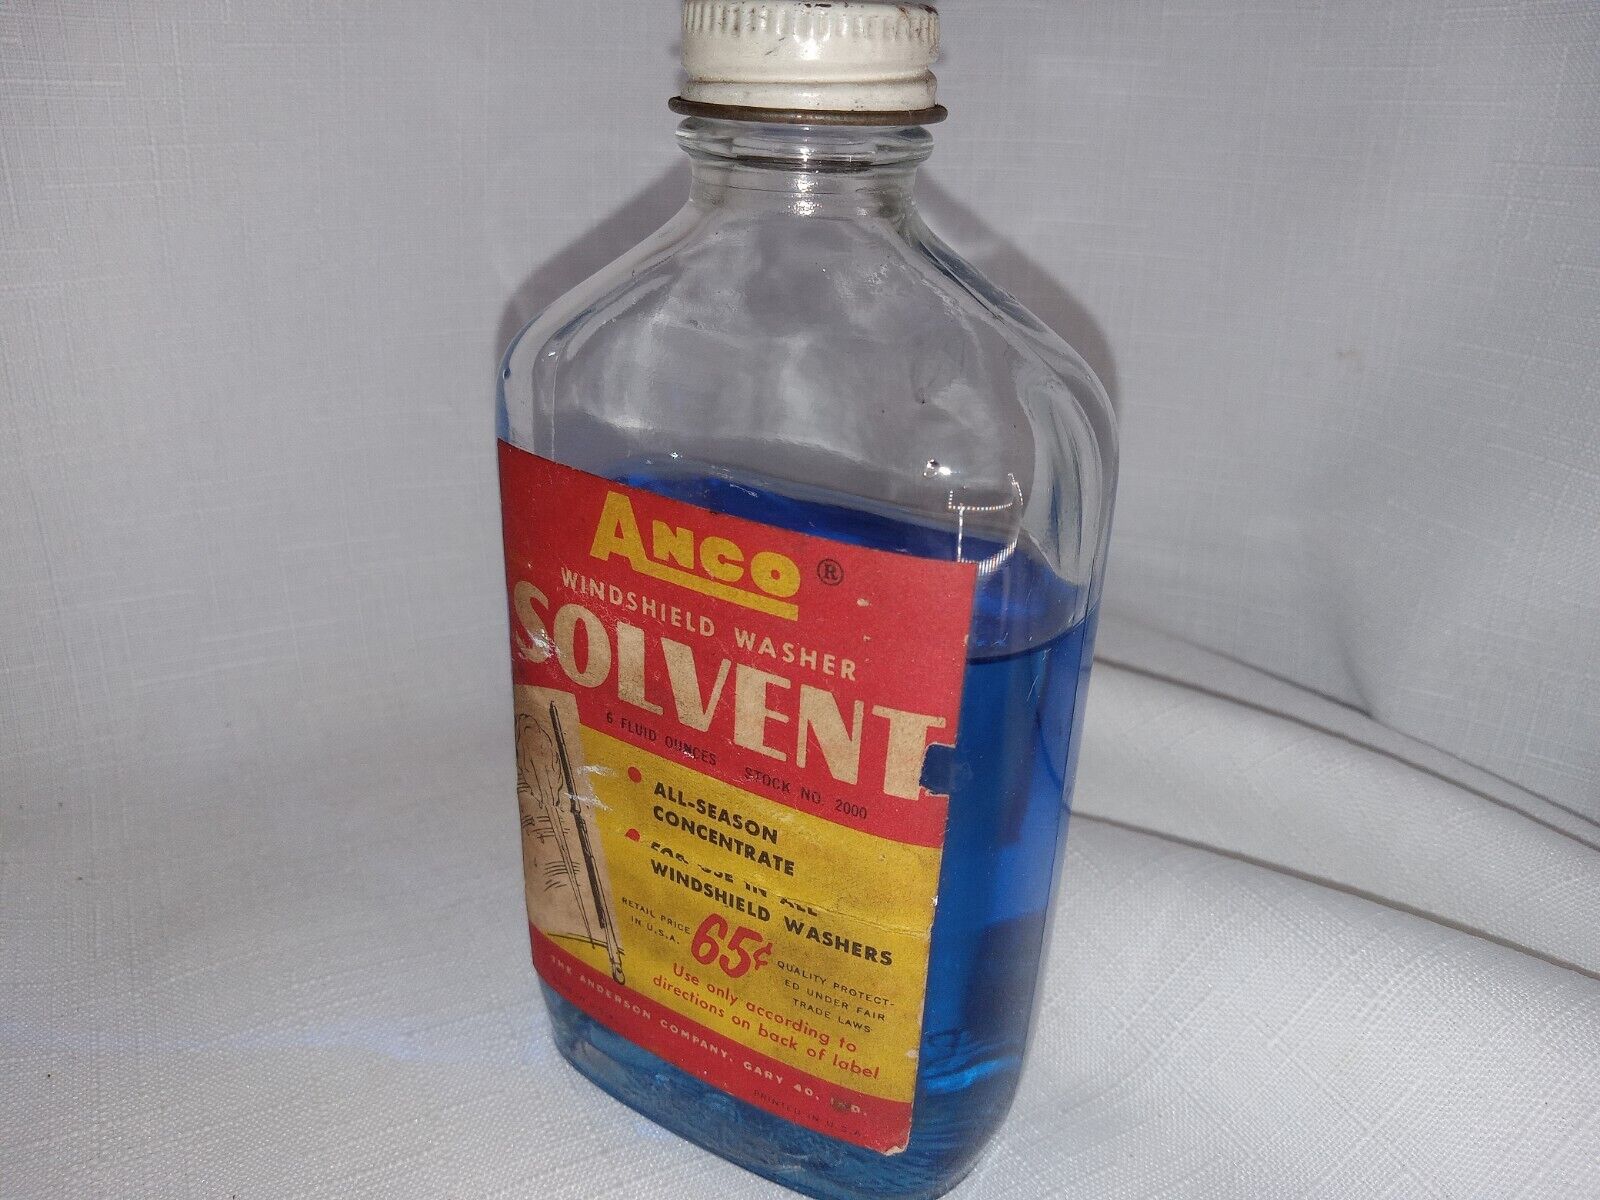 Anco 6 Oz Windshield Washer Solvent Glass Bottle Collectible Advertisement RARE